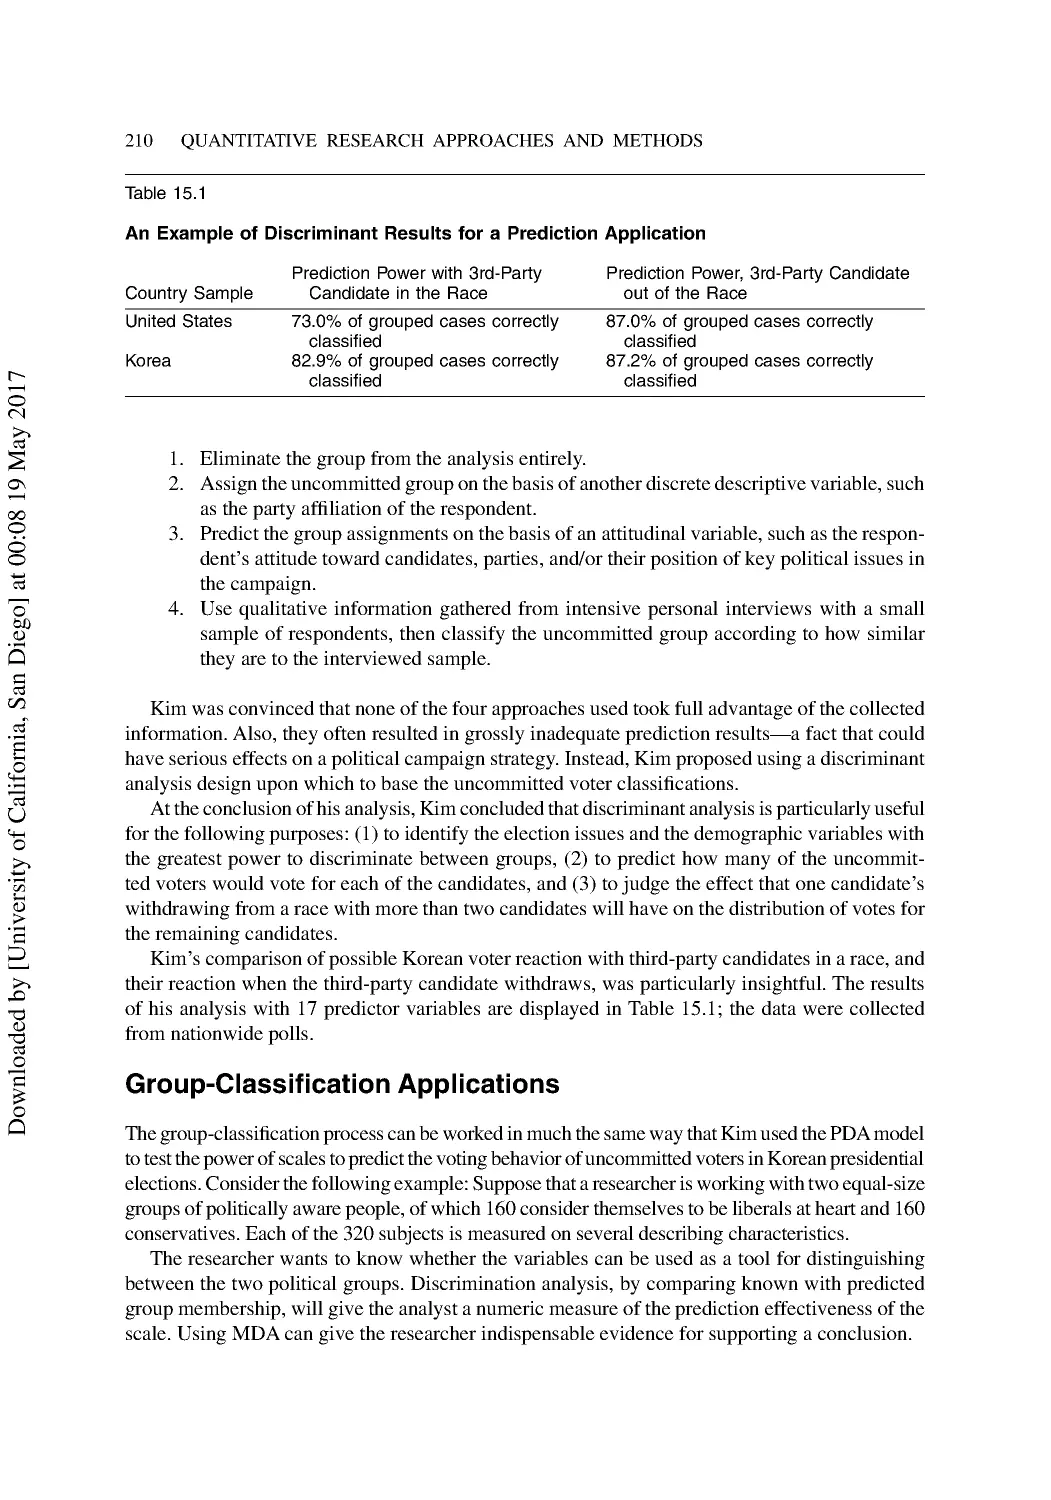 Group-Classification Applications